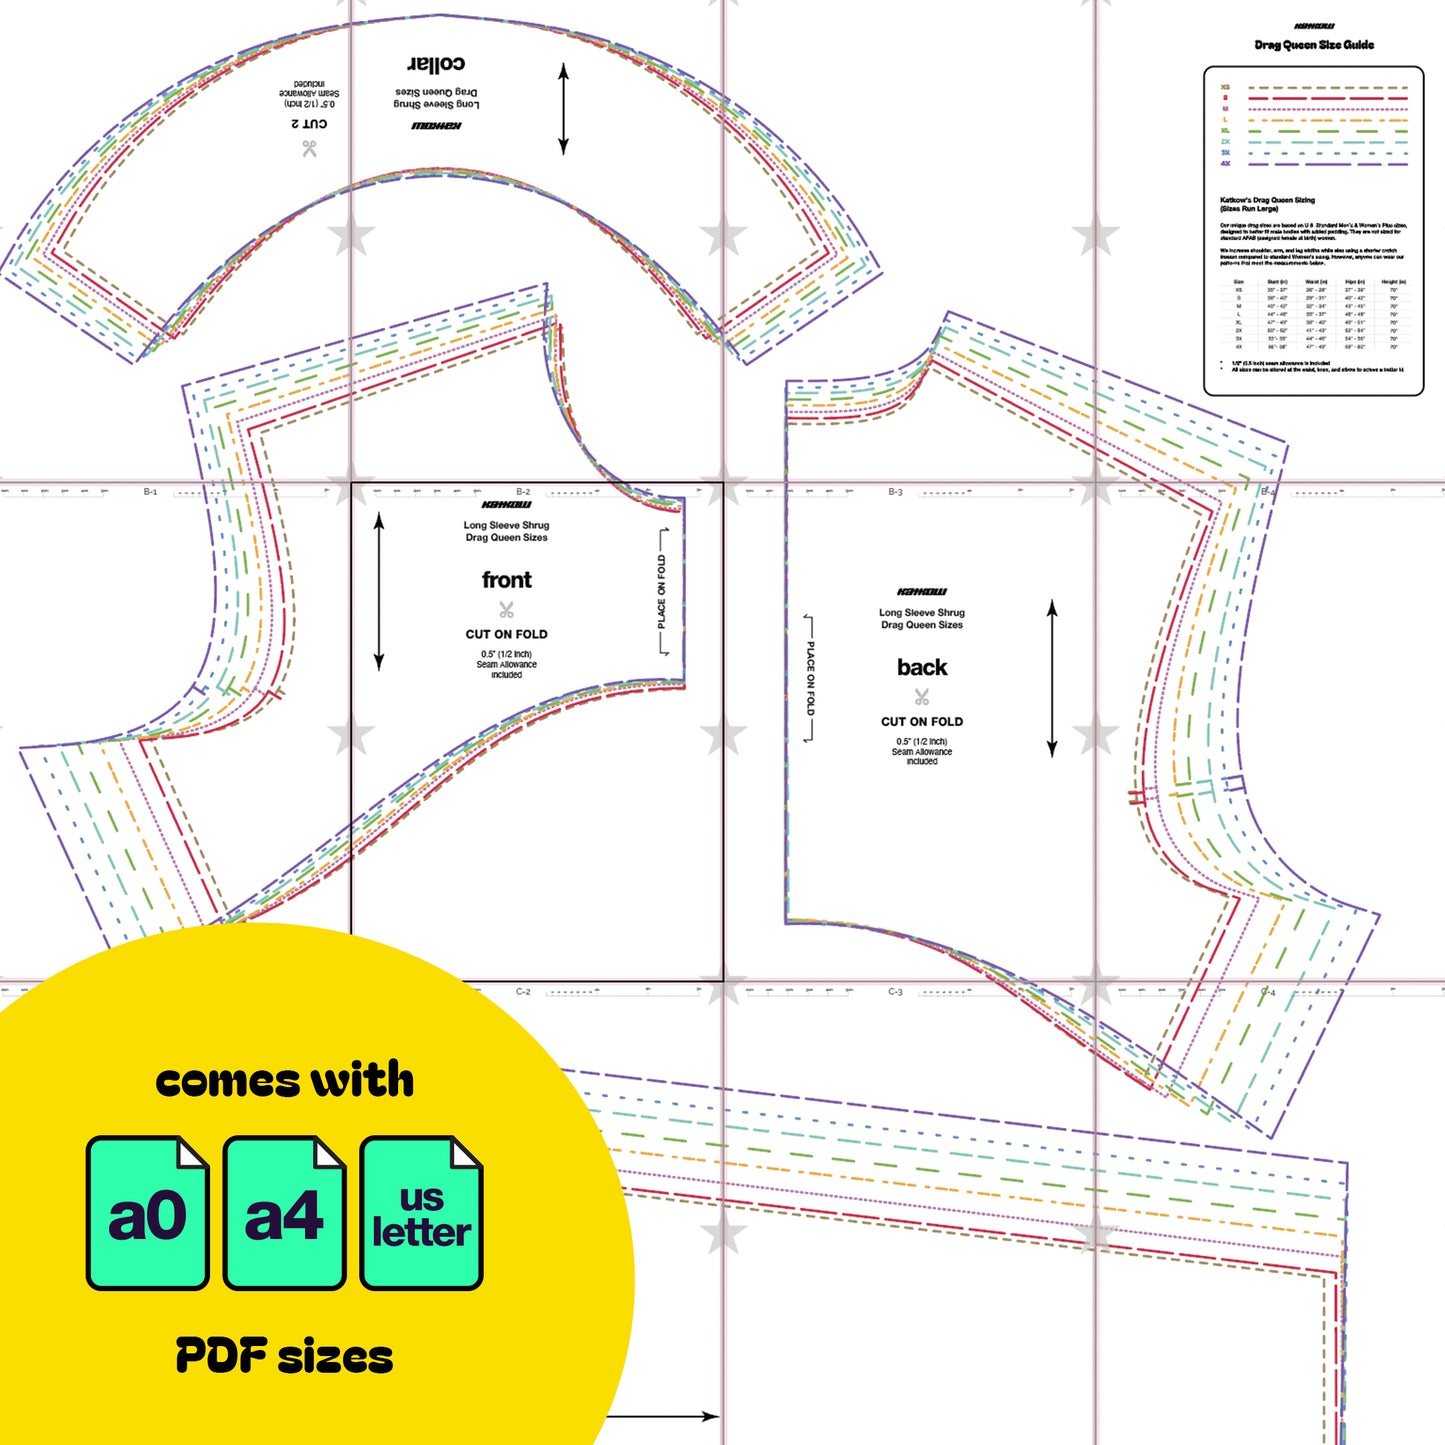 Katkow Long Sleeve Shrug Sewing Pattern (Sizes XS-4X) - PDF Drag Queen Costume Fashion Accessory Top Goth Cosplay Fairy Stripper PDF